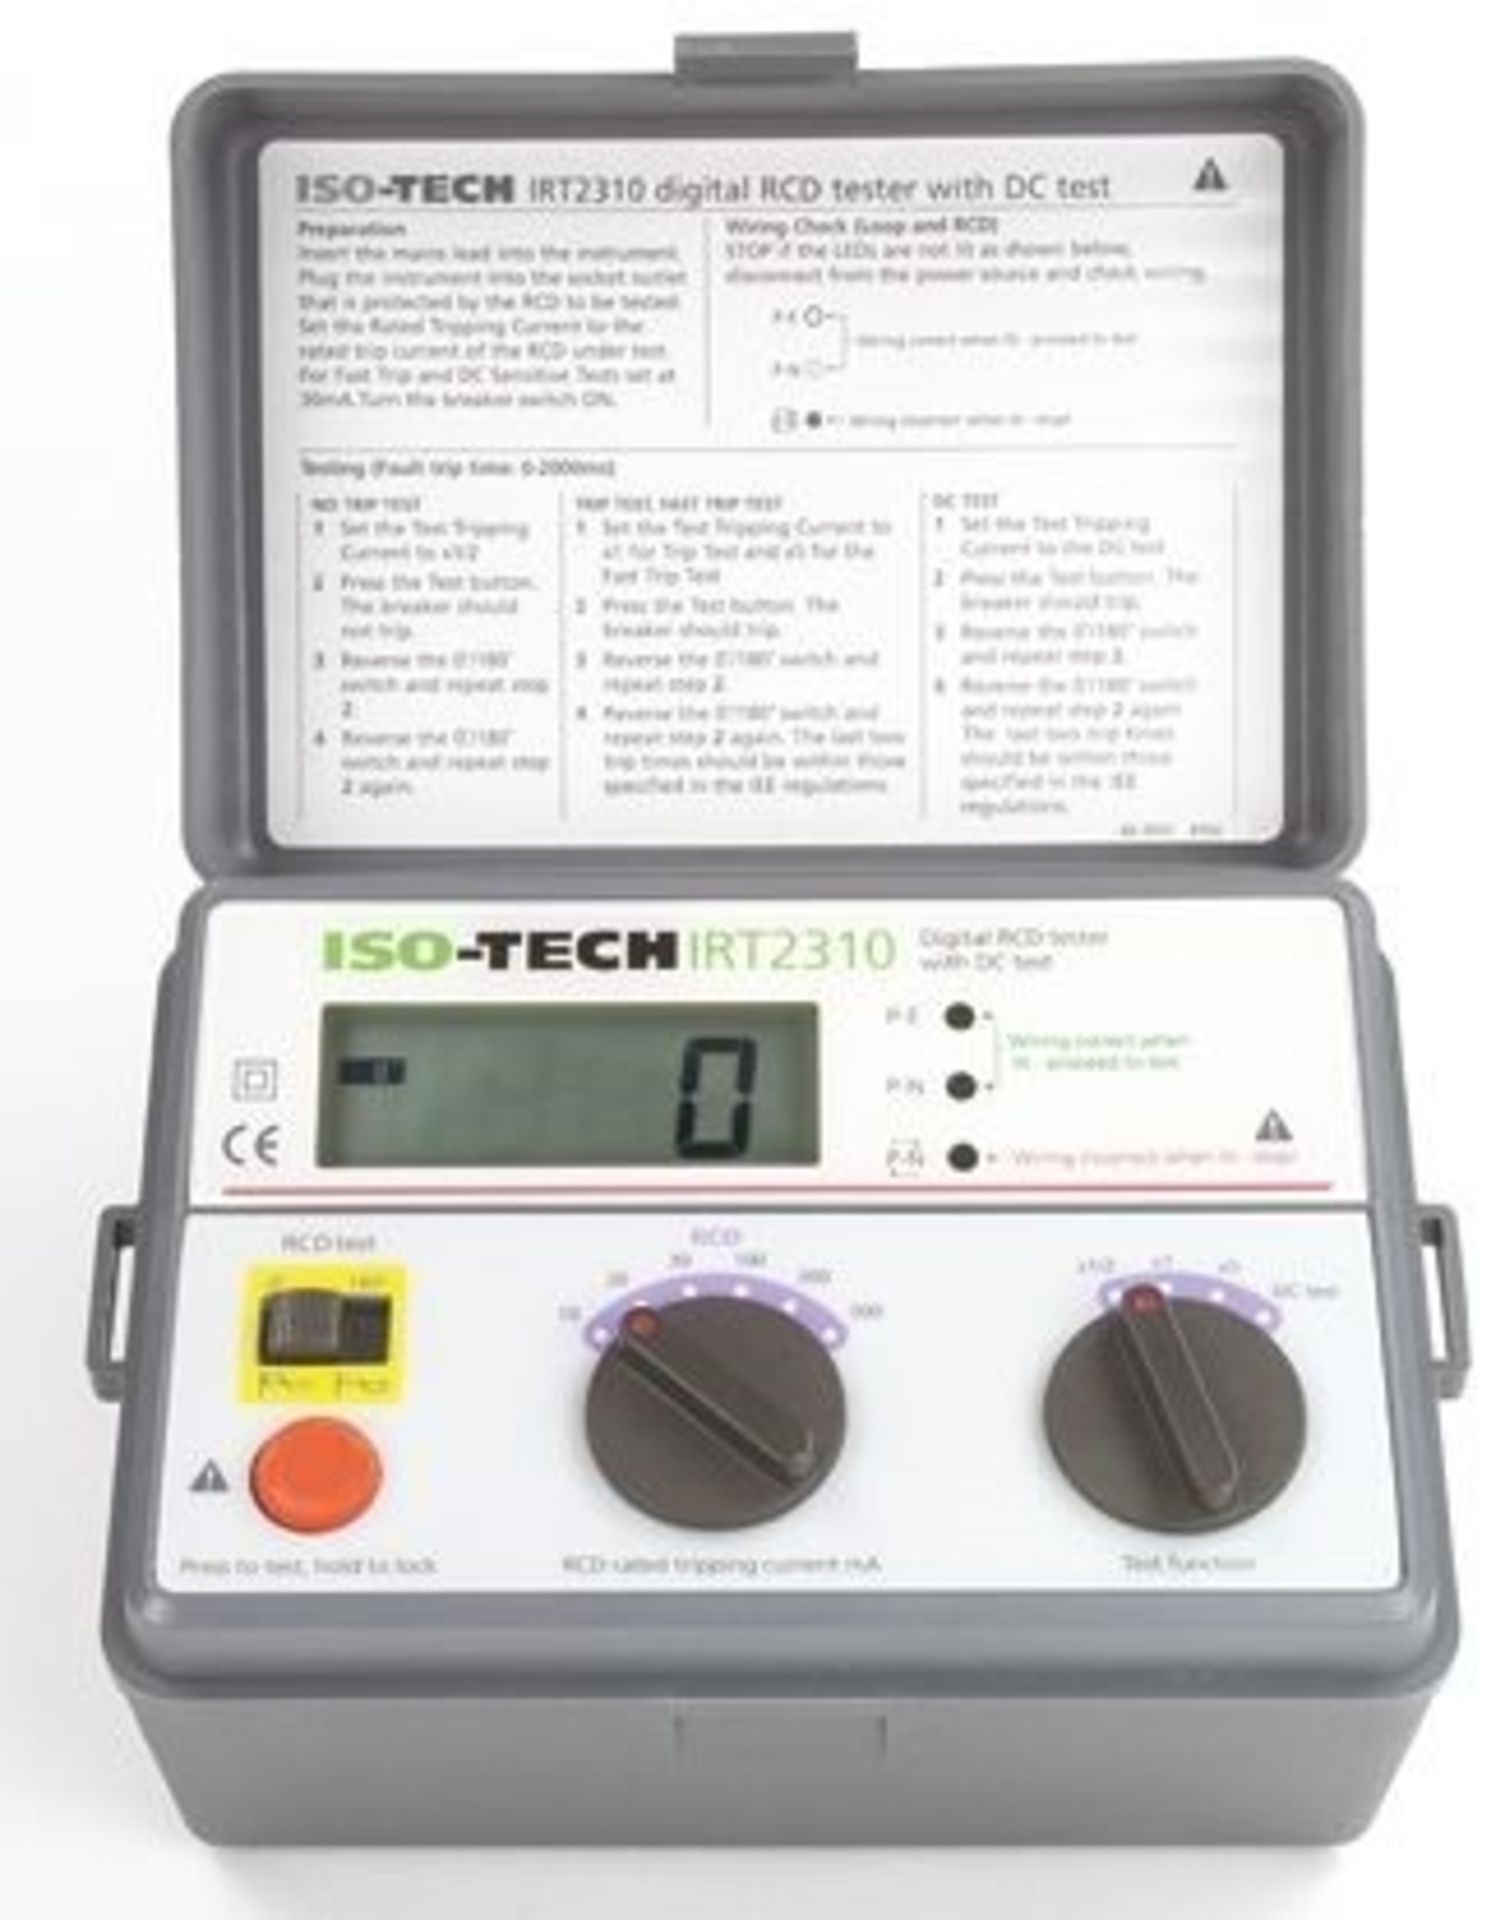 IRT 2310 RCD Tester with DC Test 500mA DC CAT III 300 V - Image 2 of 3